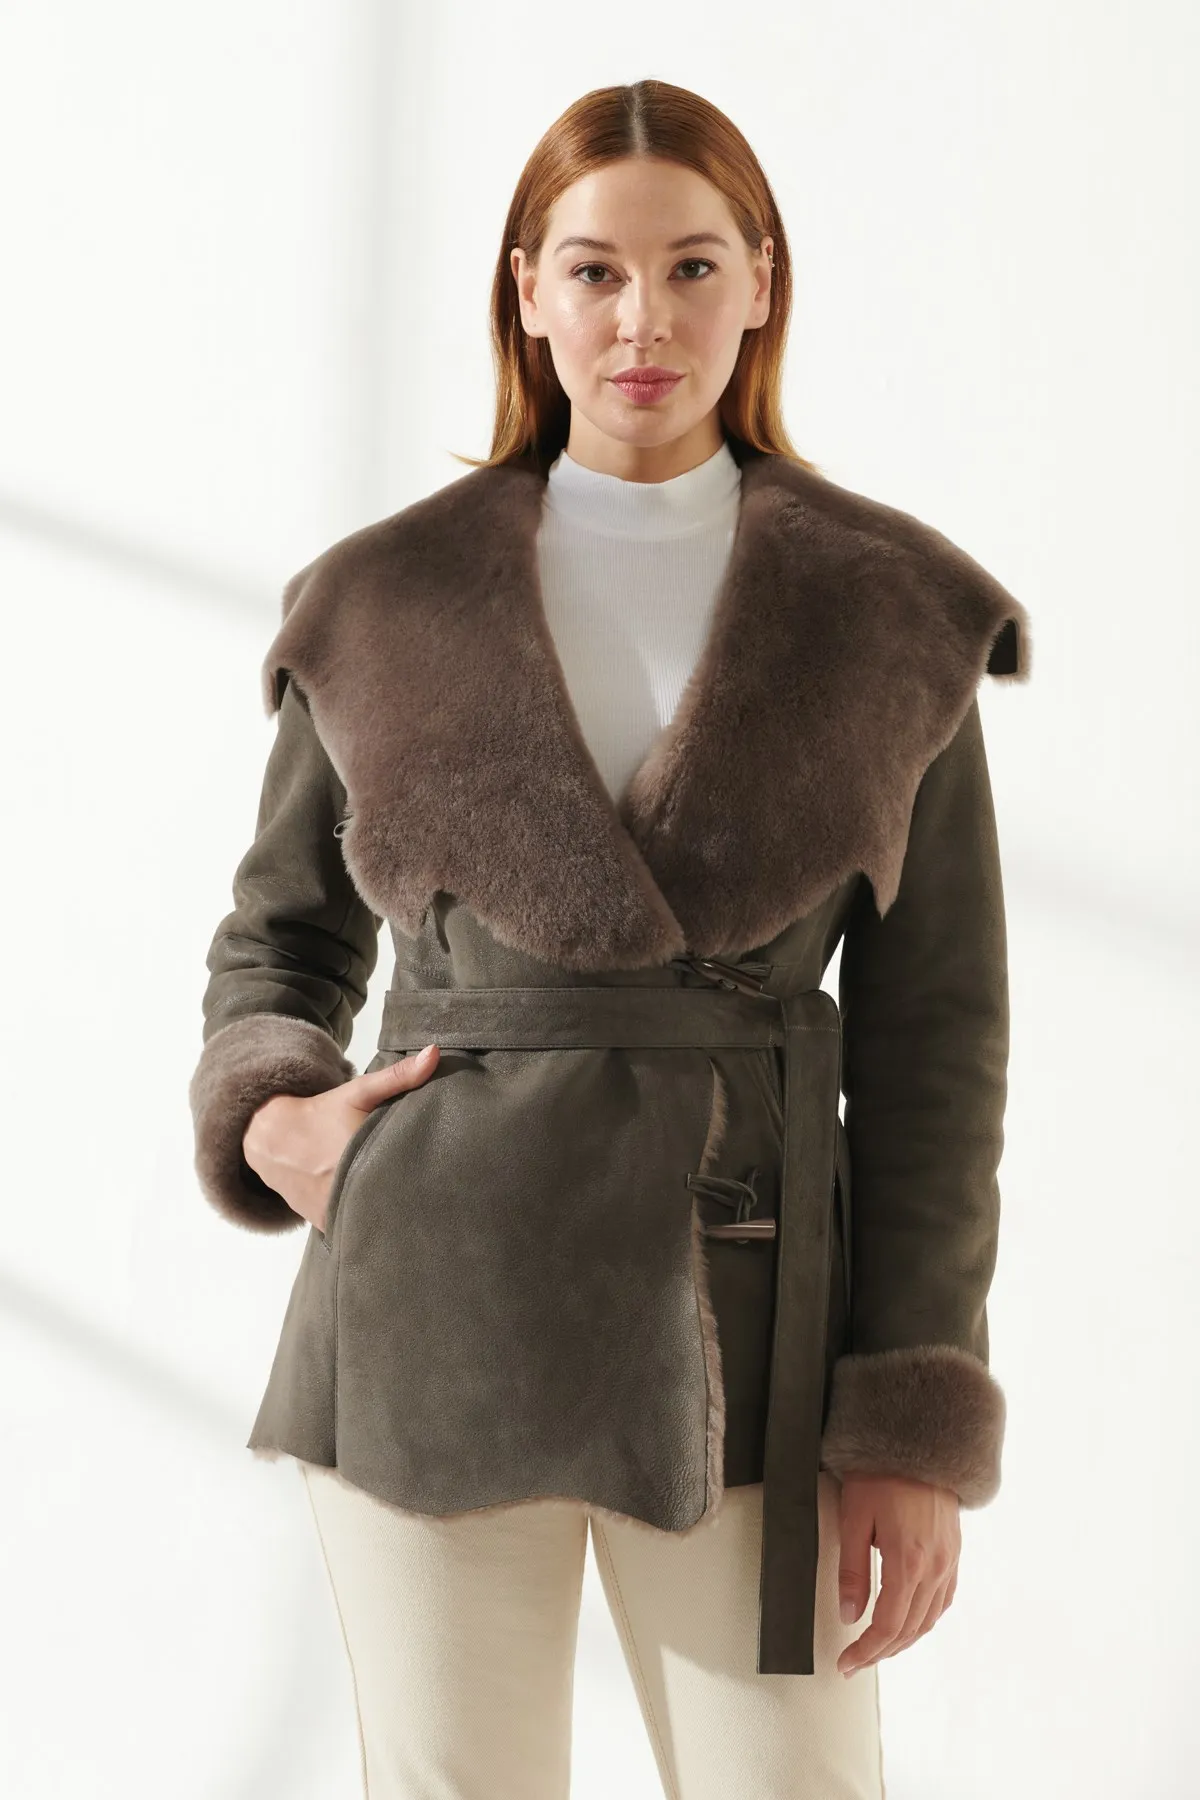 Women's Shearling Jackets Genuine Sheepskin And Fur Winter Warm Coats New Season Design Clothing Products Classic Gray Color enlarge